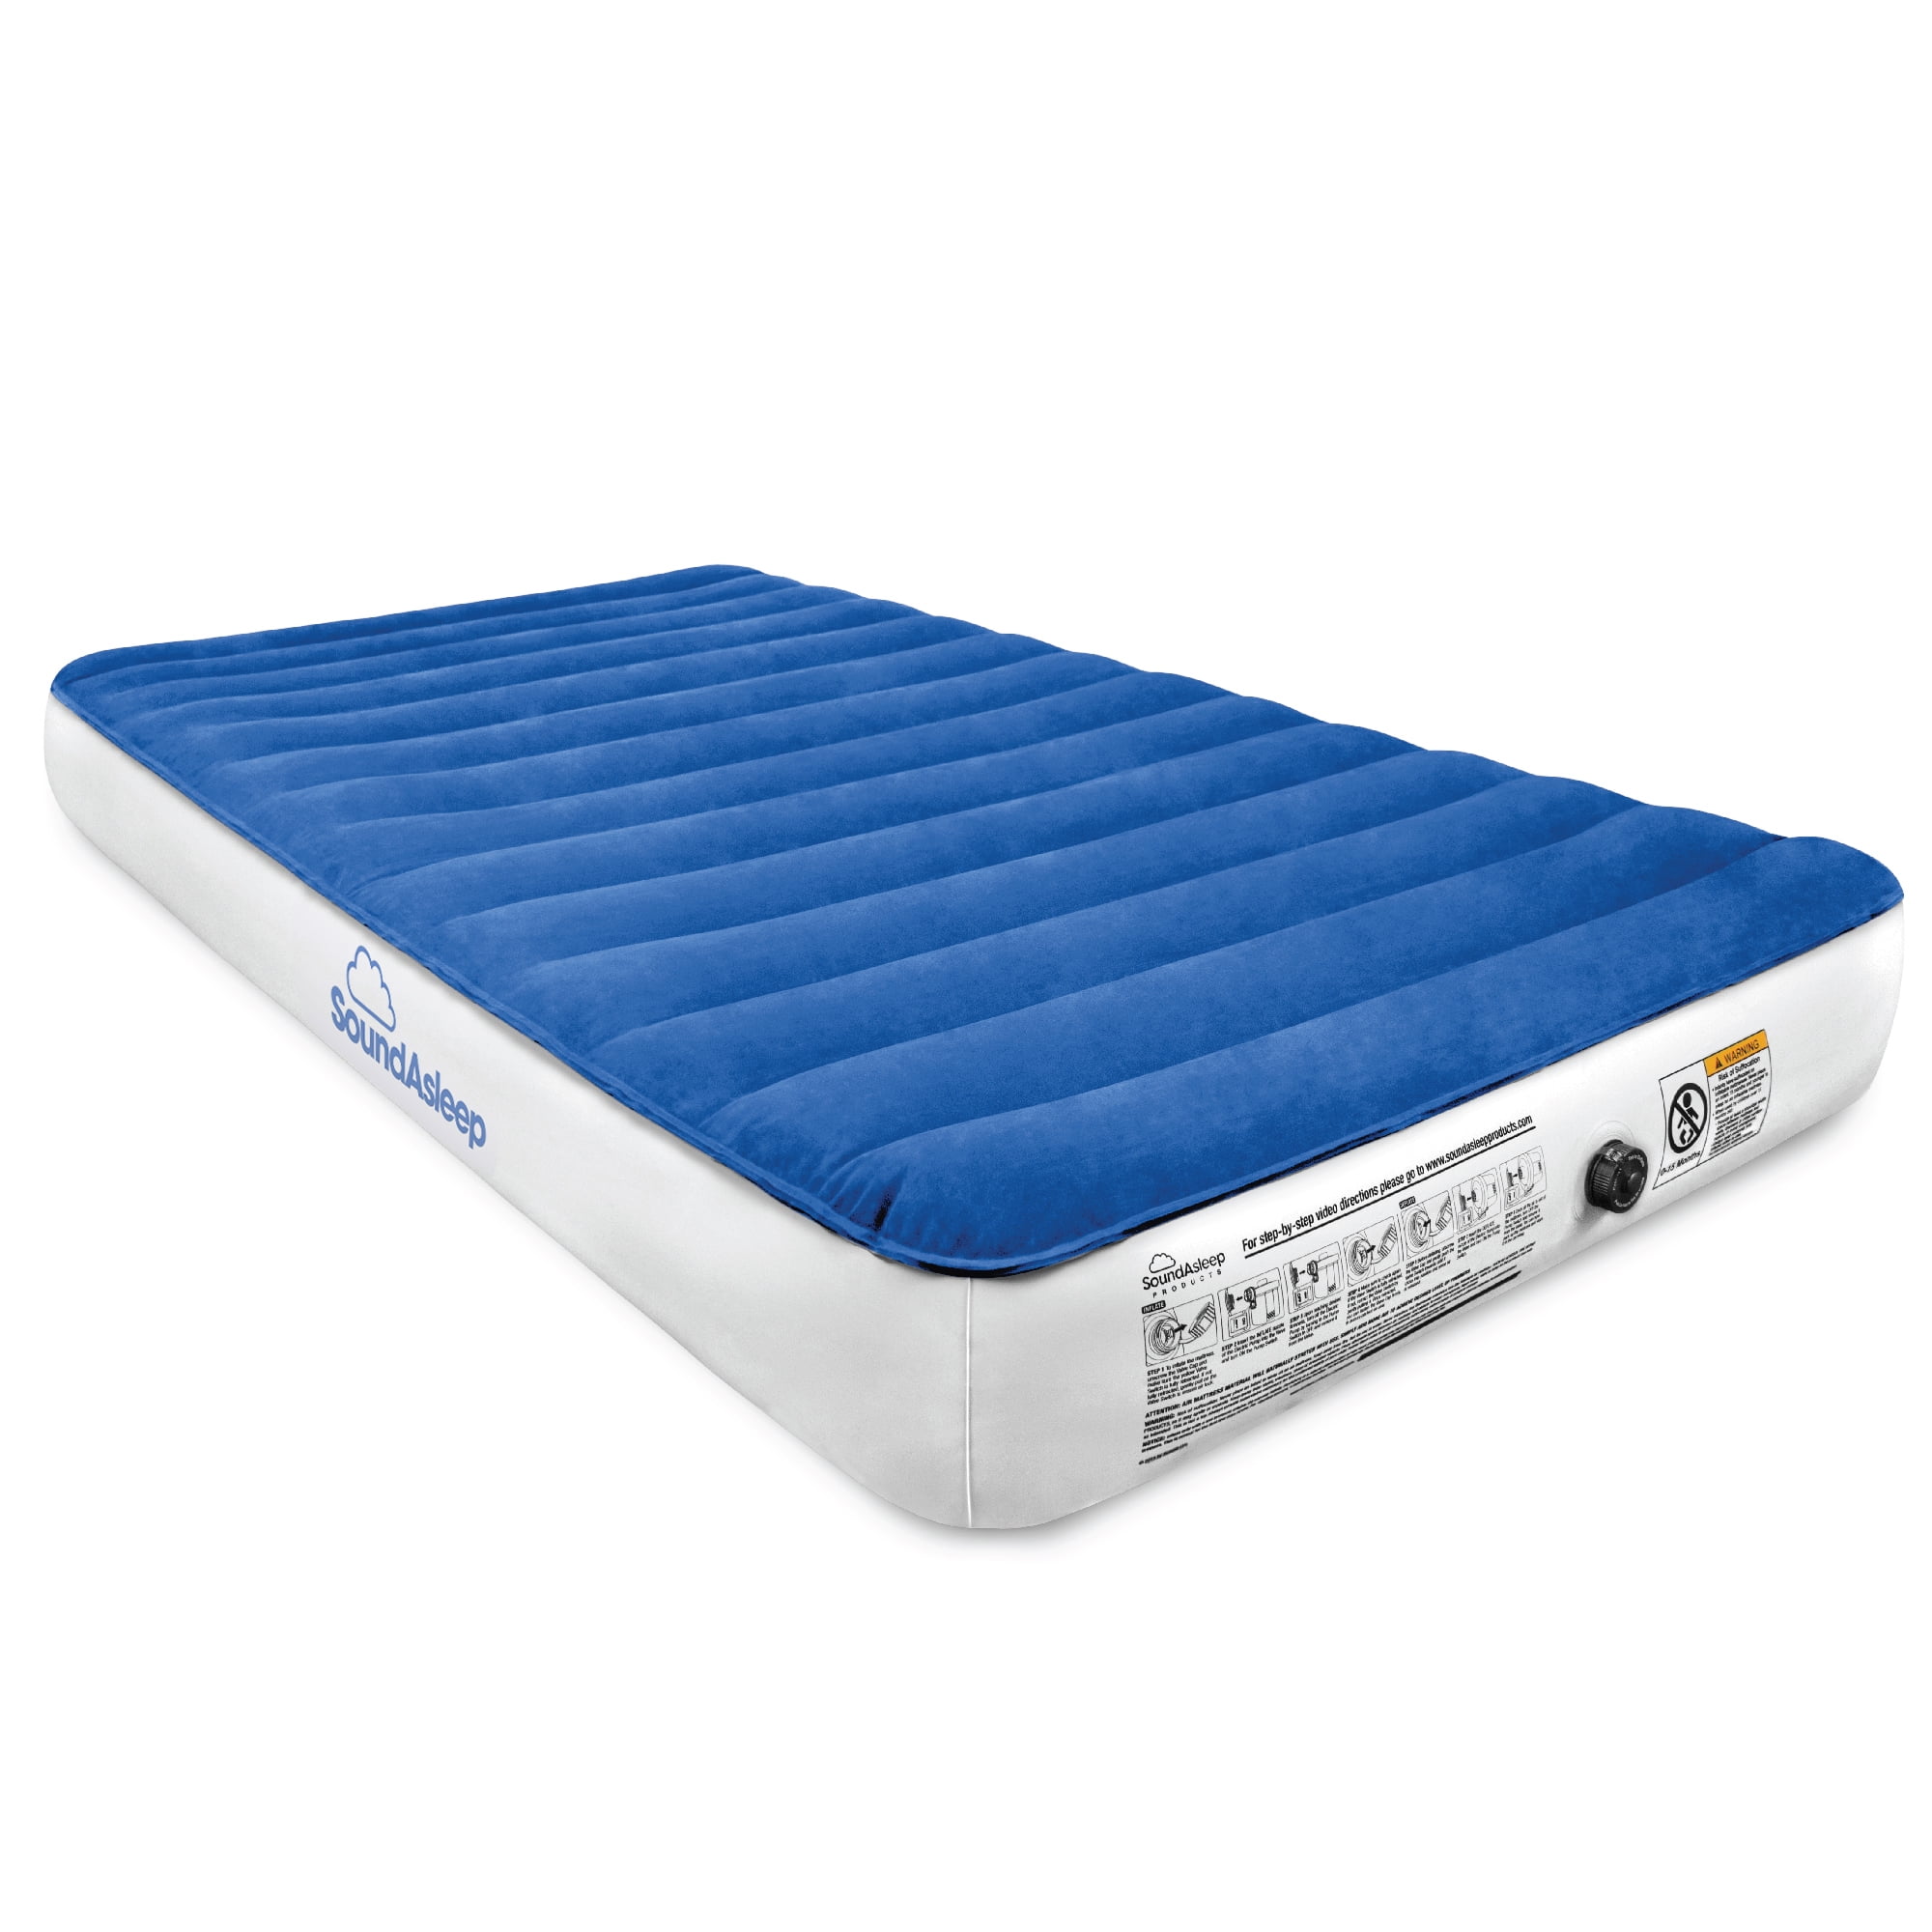 Won't Pop Off Sheets for Twin Full Air Mattress Guest Bed Camping Blue Tan  Turq